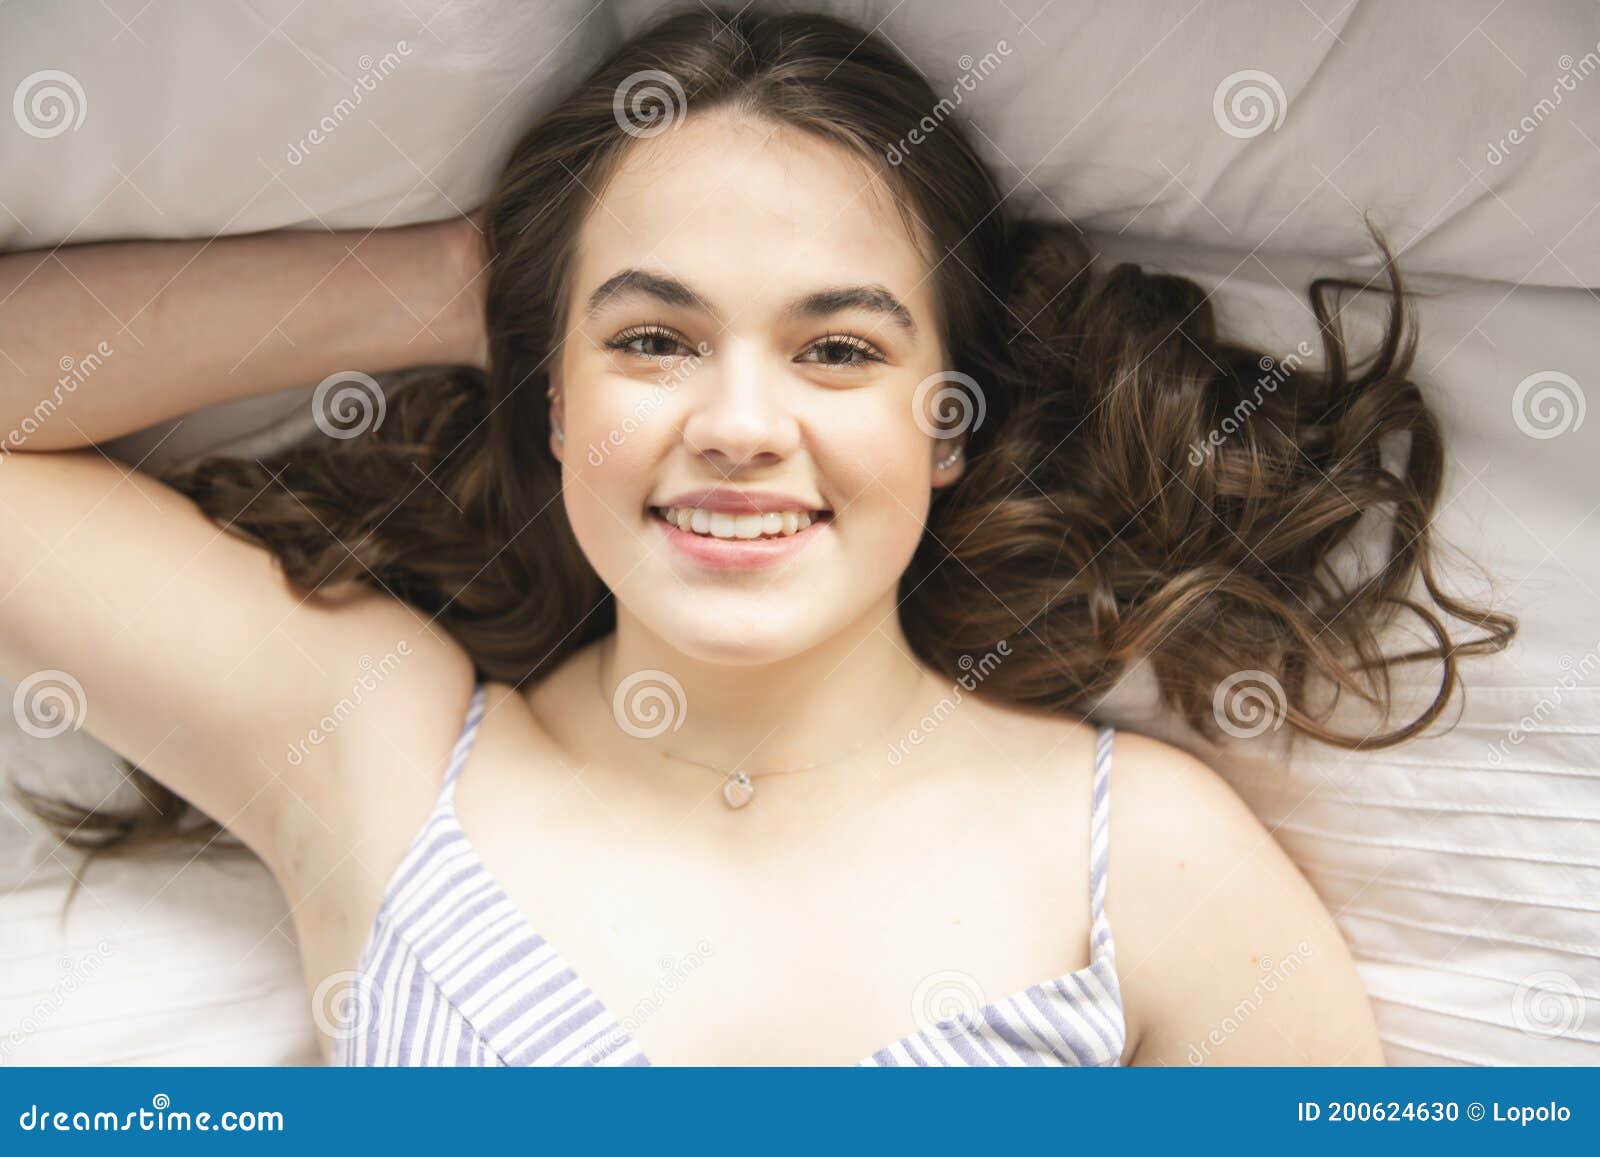 Pajamas Women on Bed Relaxing on the Morning Stock Photo - Image of ...